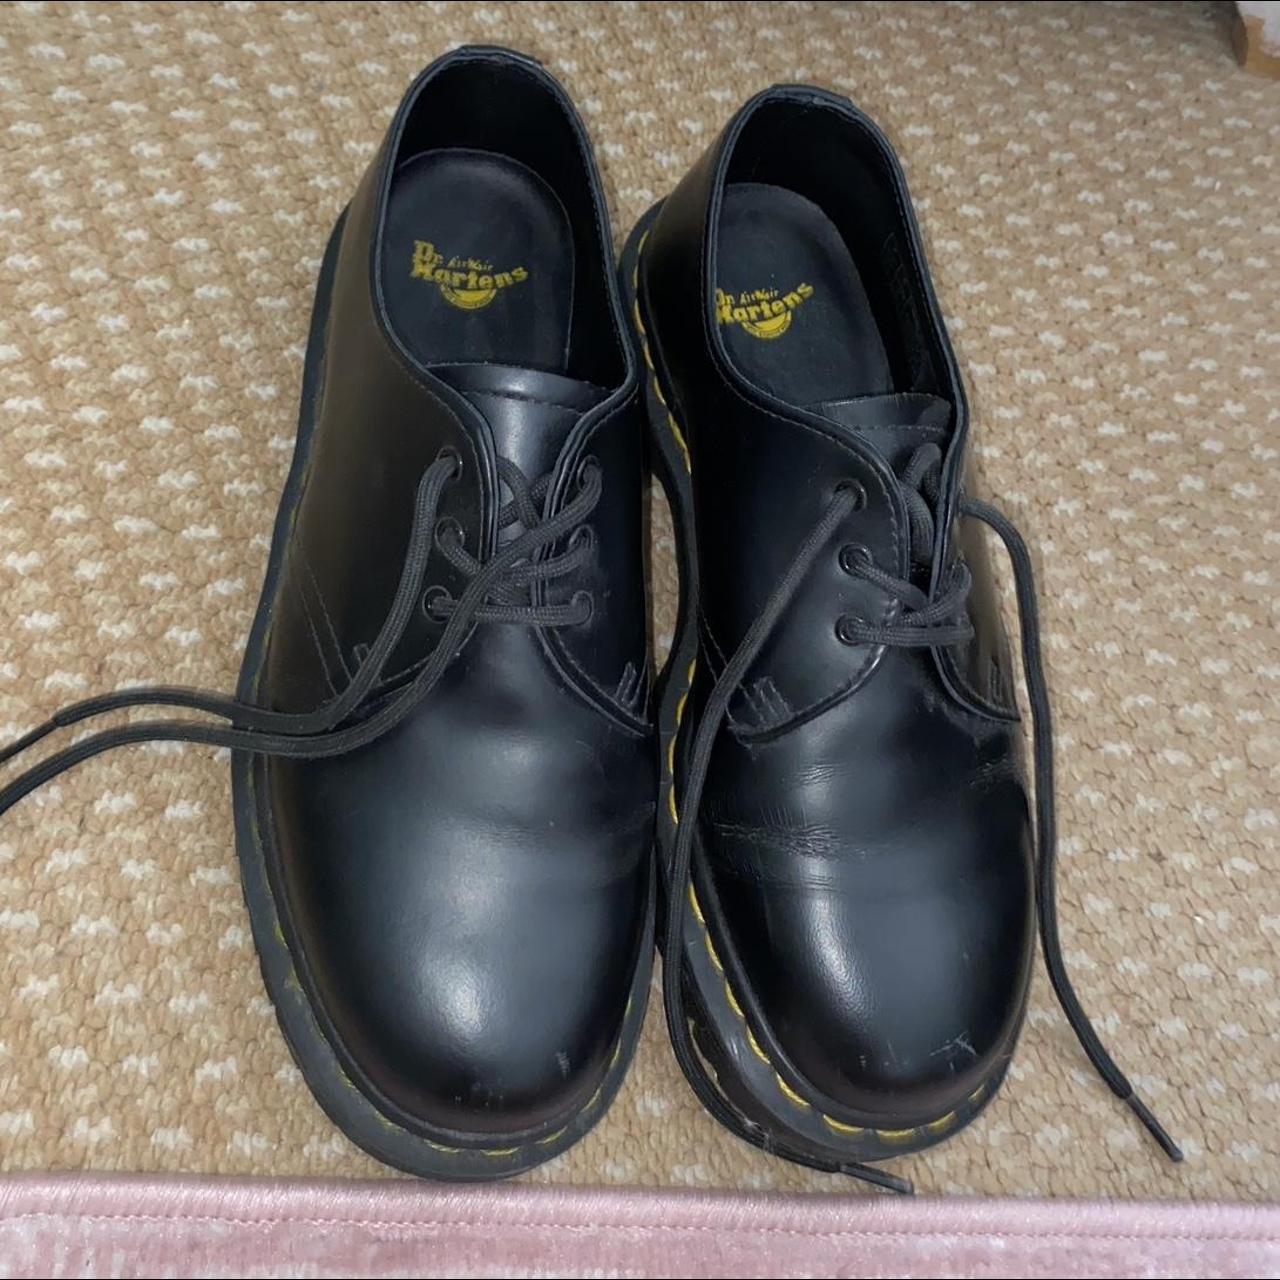 Bex Dr marten size 7 - slightly scuffed and sewing... - Depop